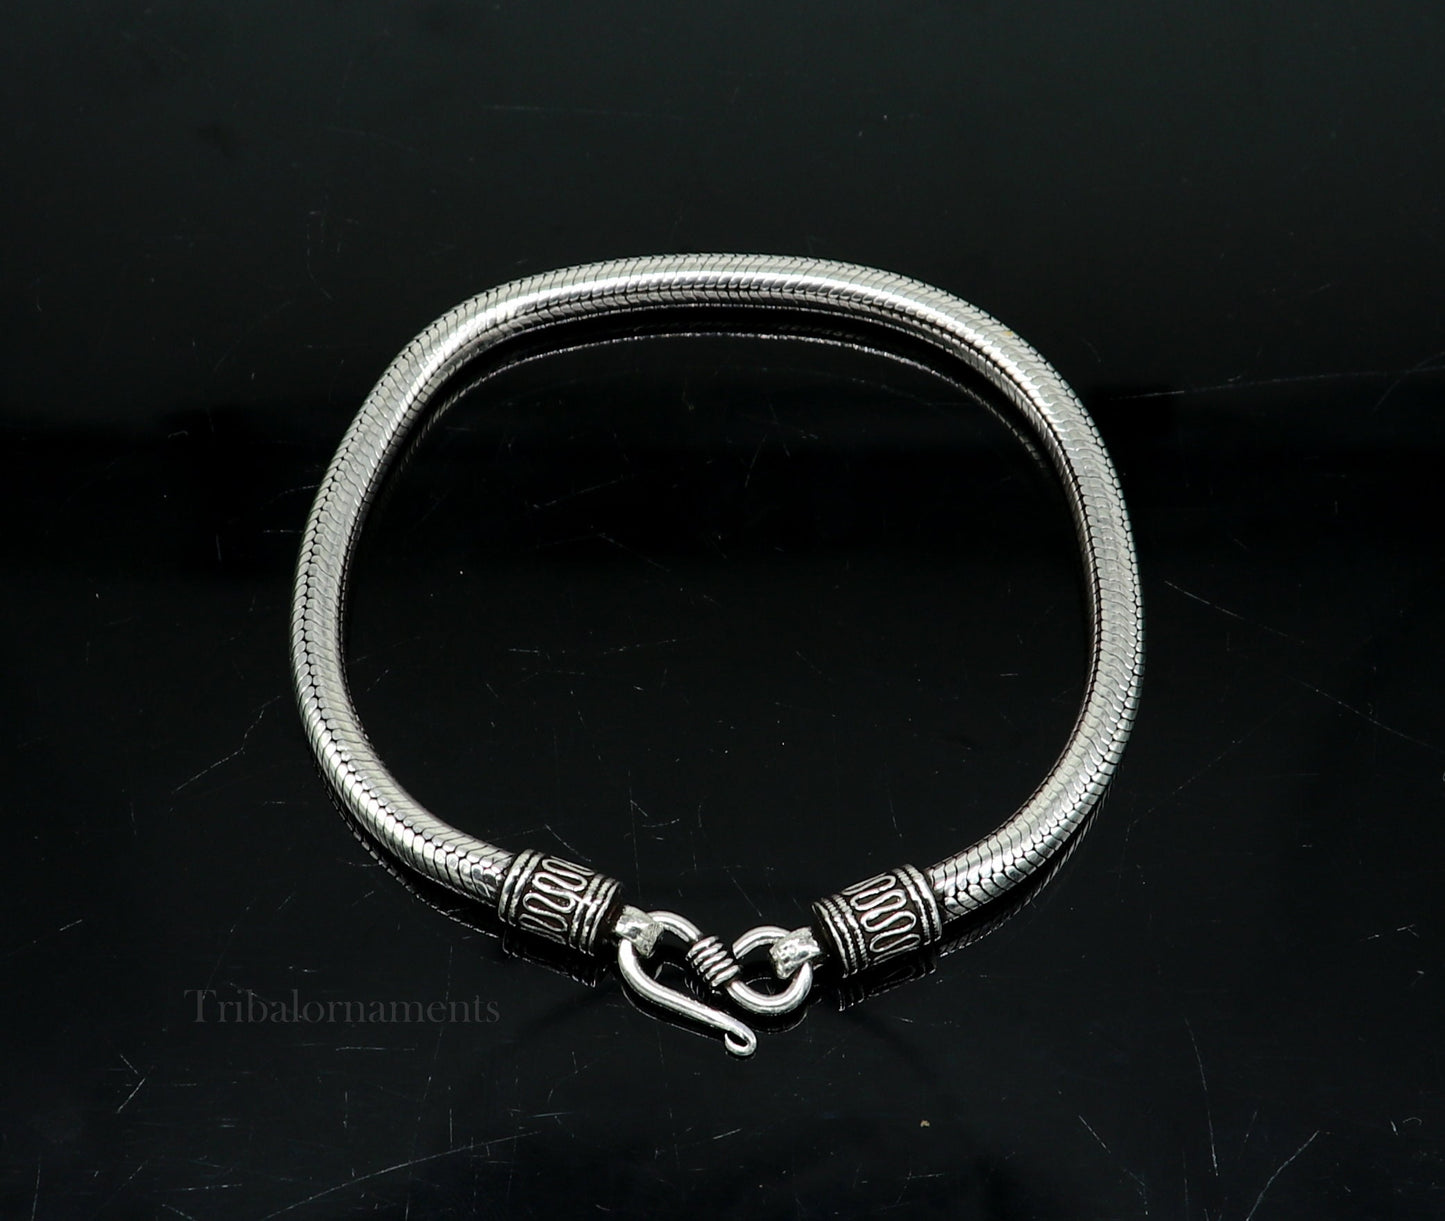 4.5 mm Solid 925 sterling silver Amazing vintage style snake chain handmade bracelet unisex indian tribal best unisex gifting jewelry sbr228 - TRIBAL ORNAMENTS